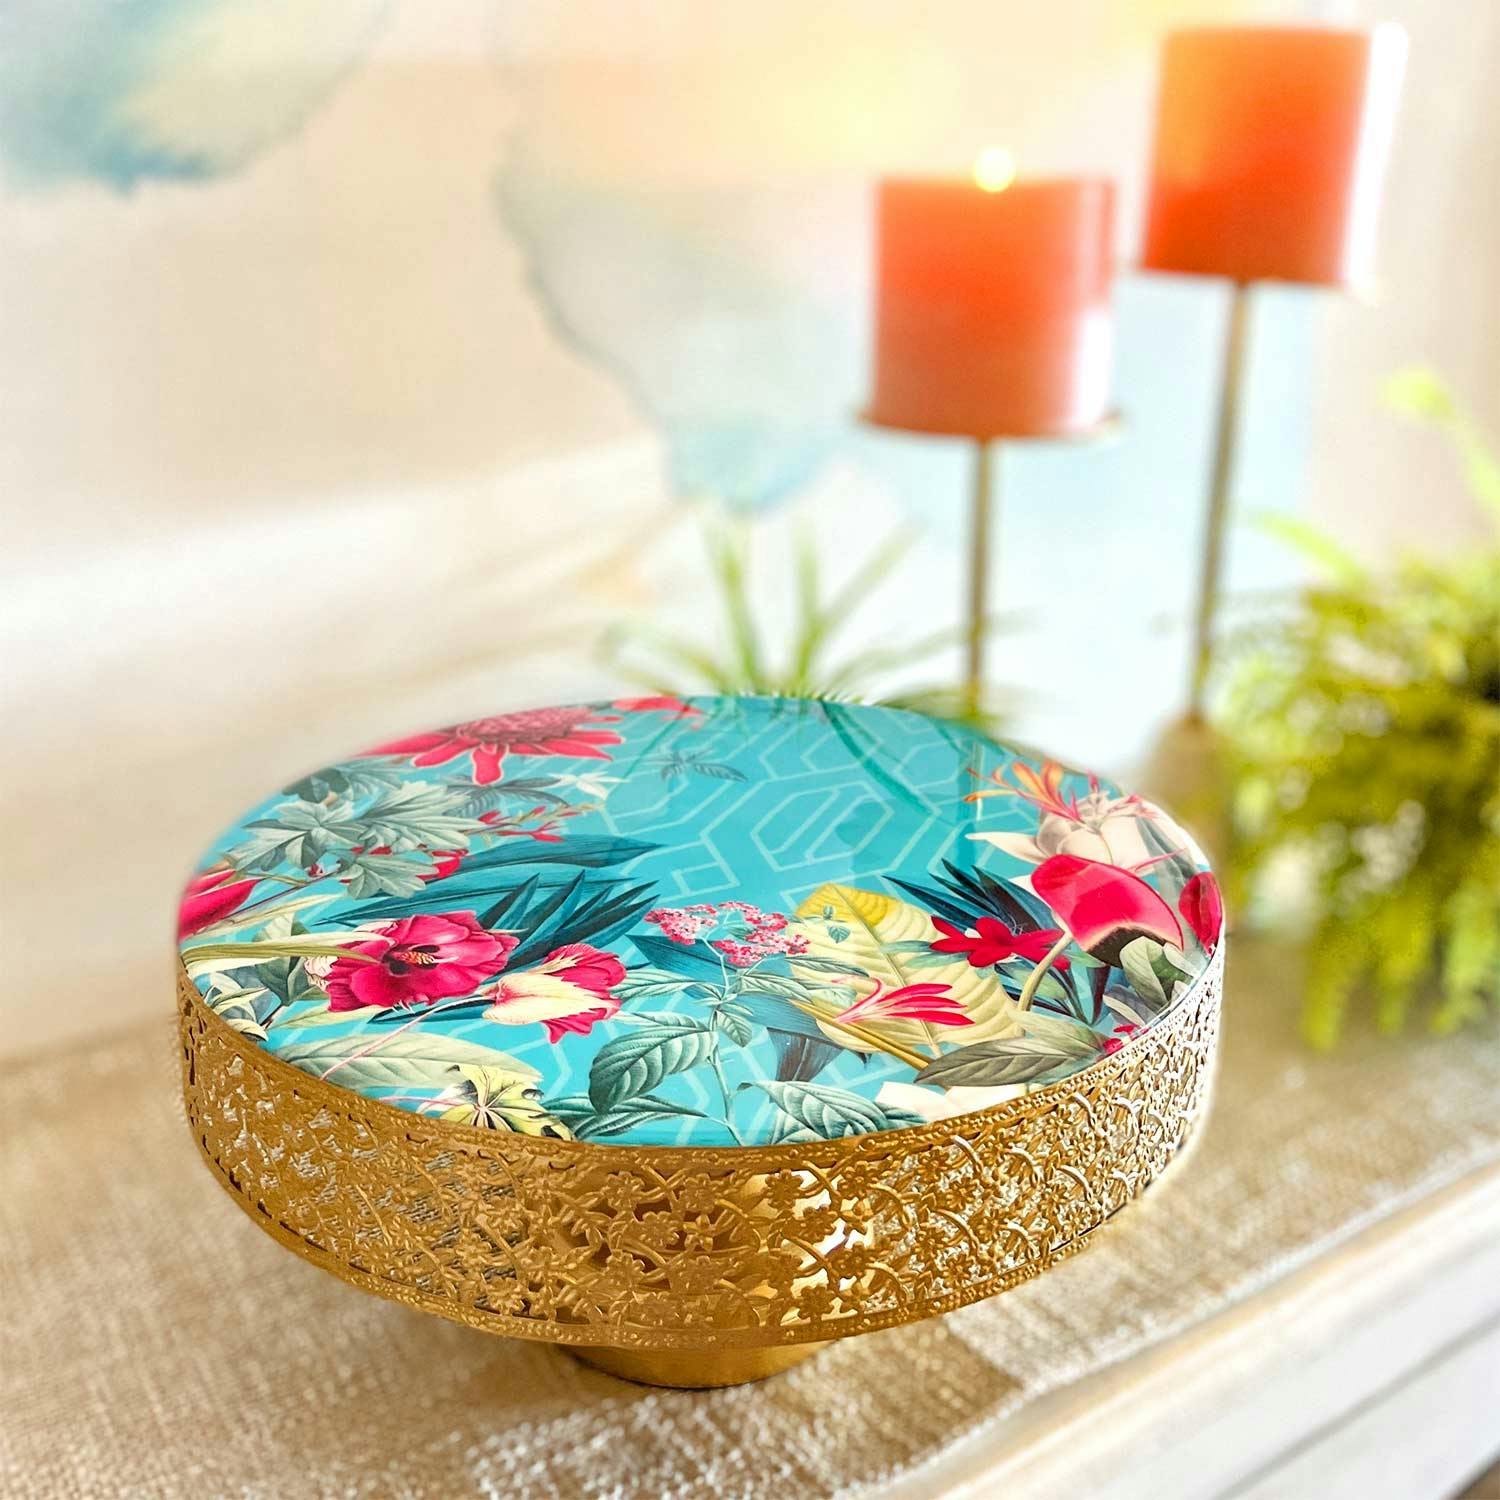 Cake Stand - Chilean Deco, a product by Faaya Gifting